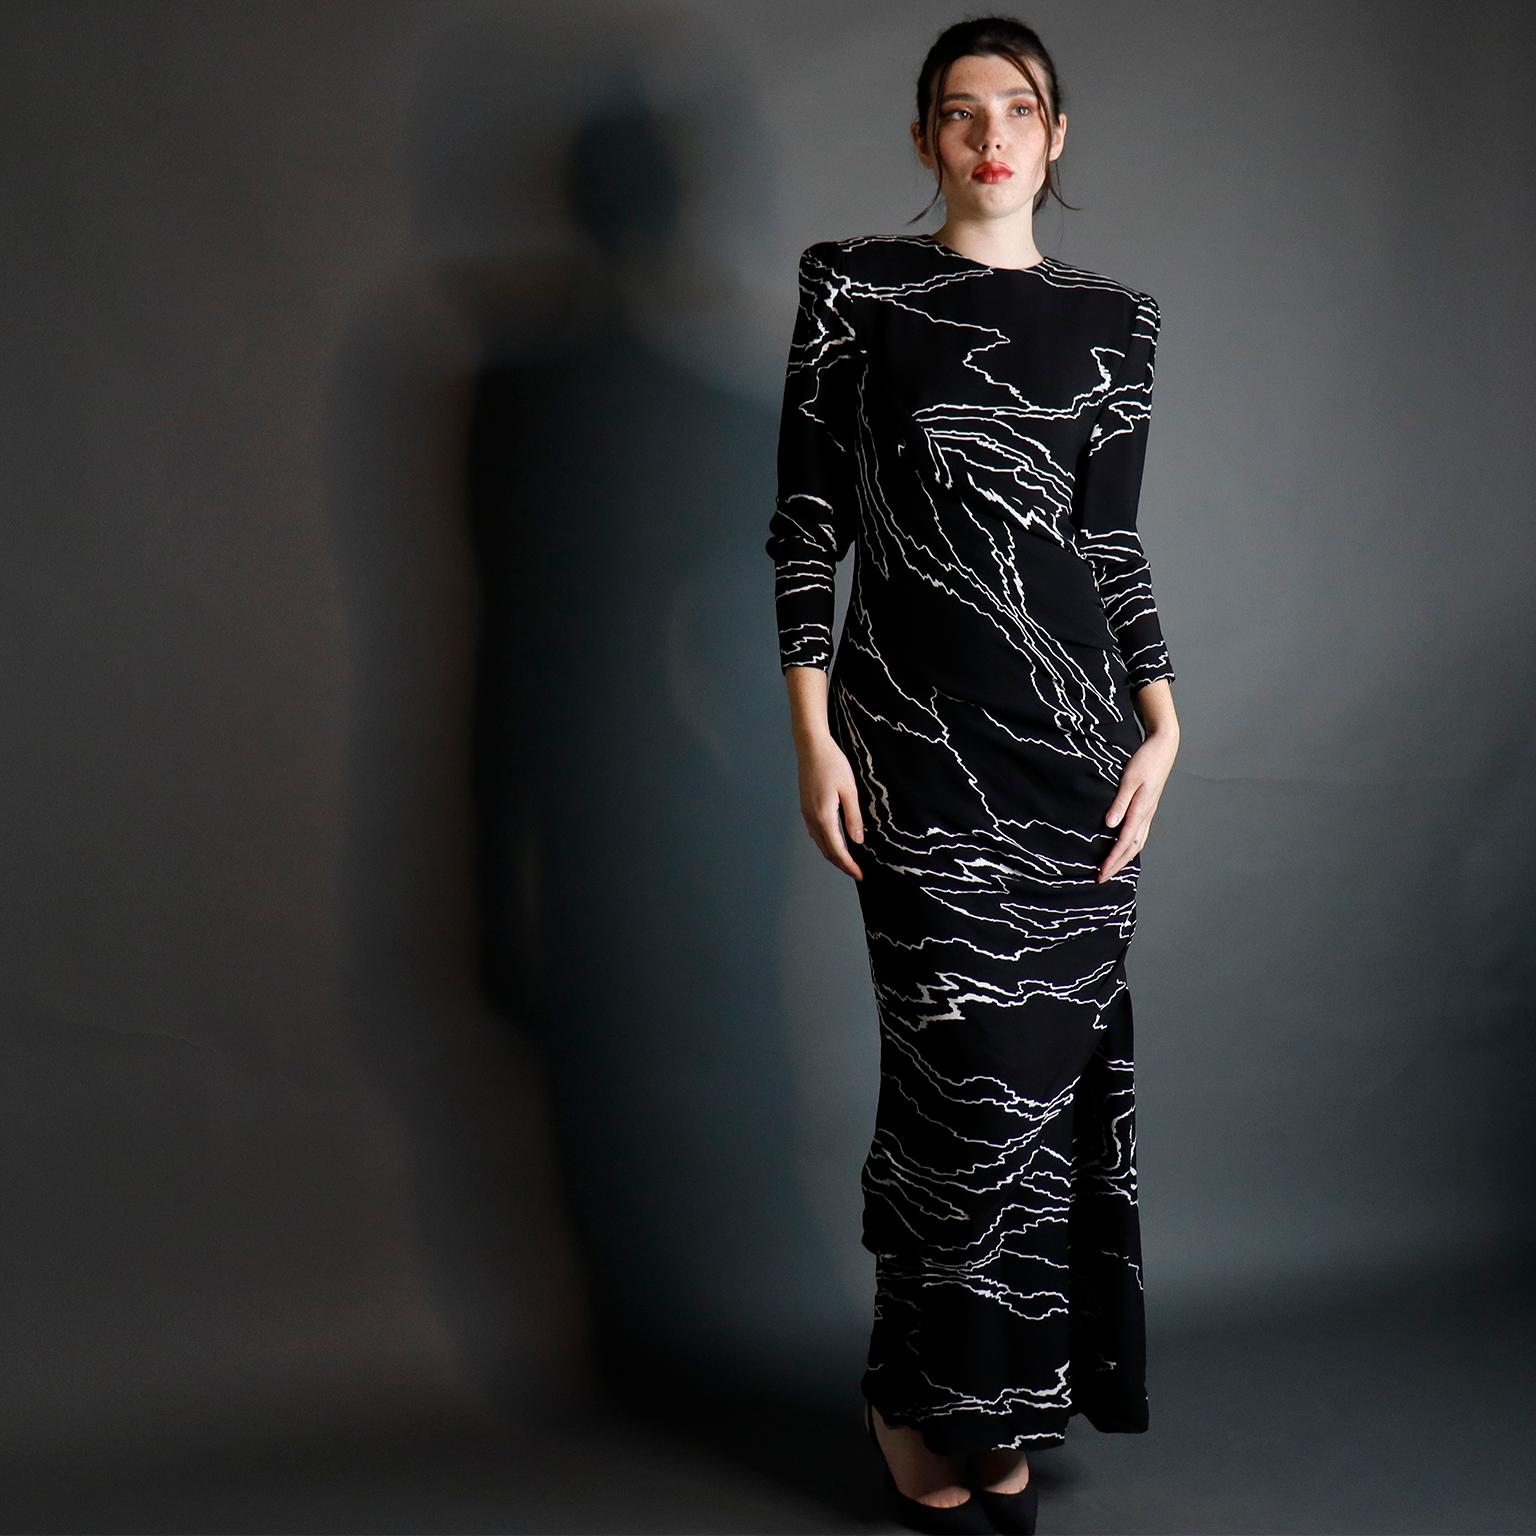 This elegant Bill Blass designer vintage dress is from his 1985 collection and we think it's so fabulous!  The long dress in in a stunning black and white abstract print. We love vintage Bill Blass pieces and this one is so much fun to wear! There